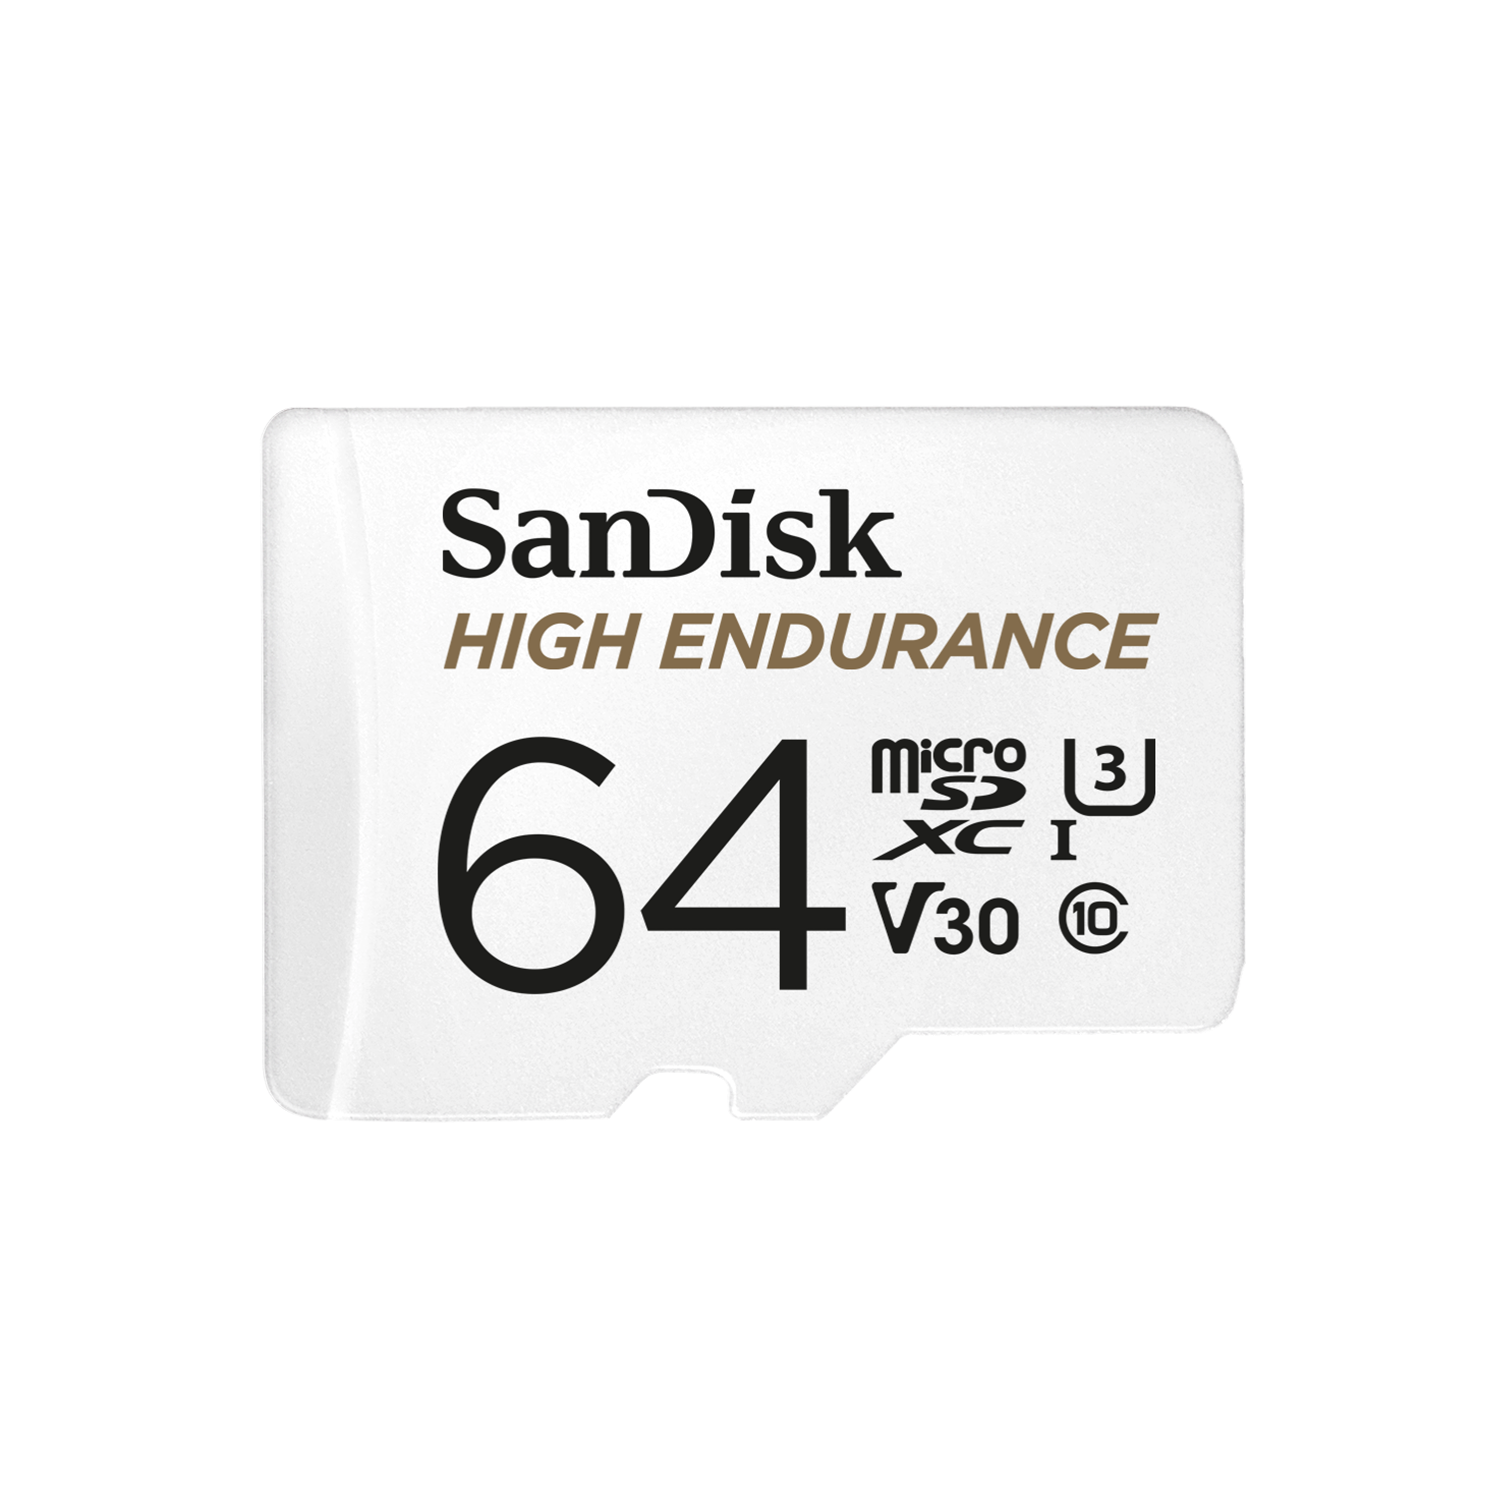 SanDisk 64GB High Endurance Micro SD Card with Adapter SDSQQNR-064G for Dash Cam and Video Monitoring System